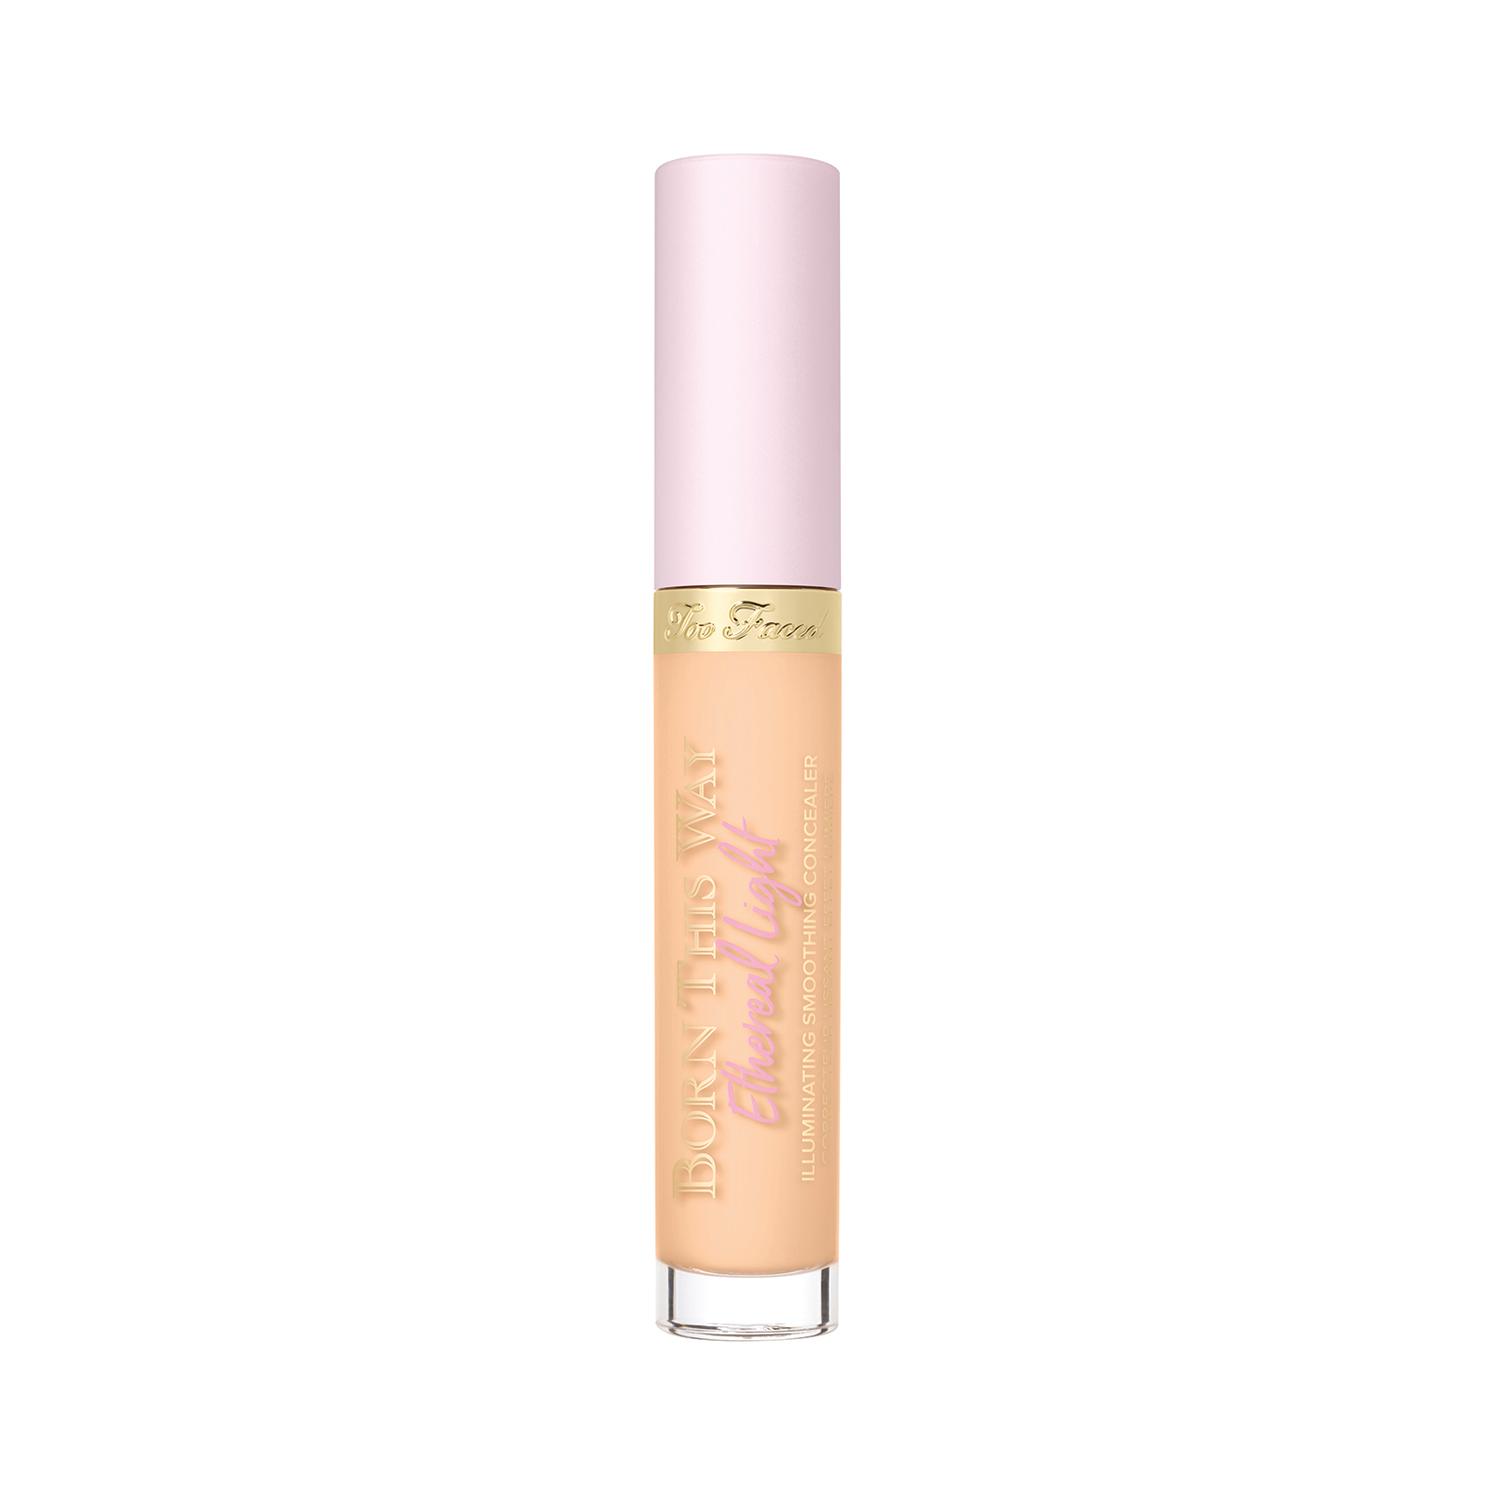 Too Faced Born This Way Illuminating Concealer - Butter Croissant (5ml)